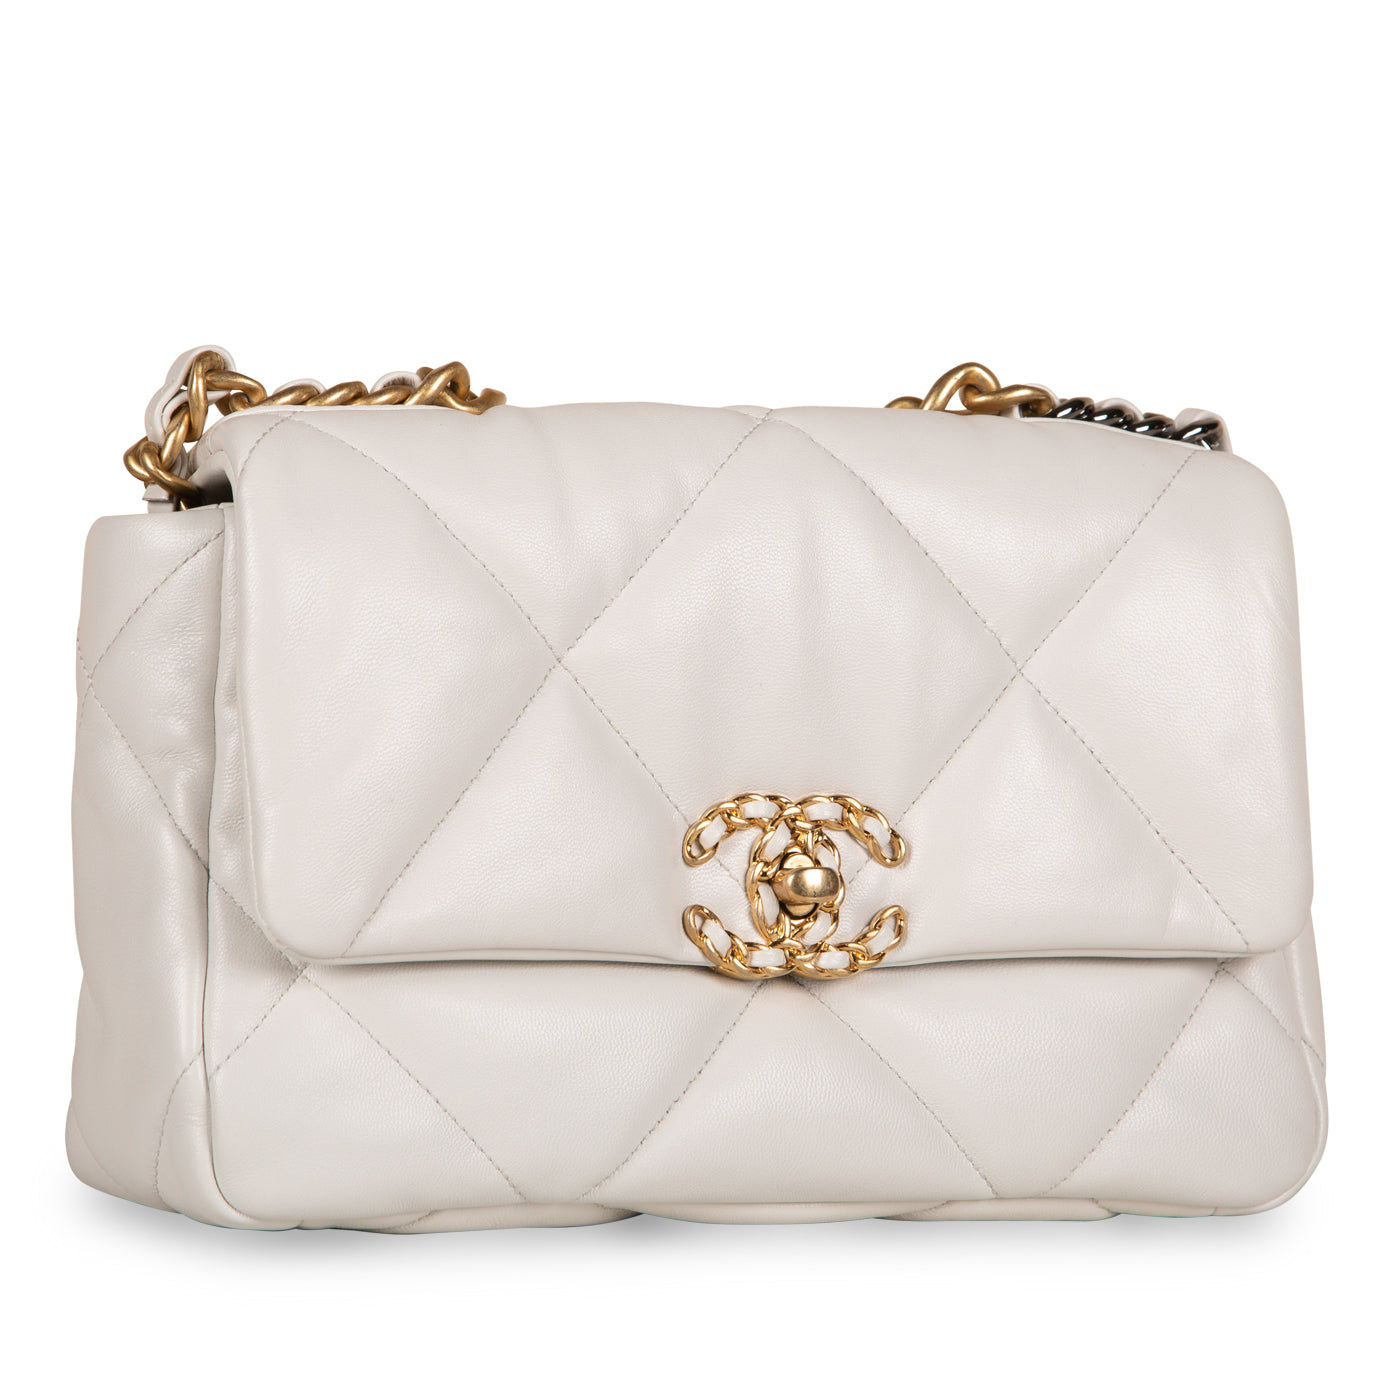 How The Vogue Editors Are Styling White Chanel Bags  British Vogue